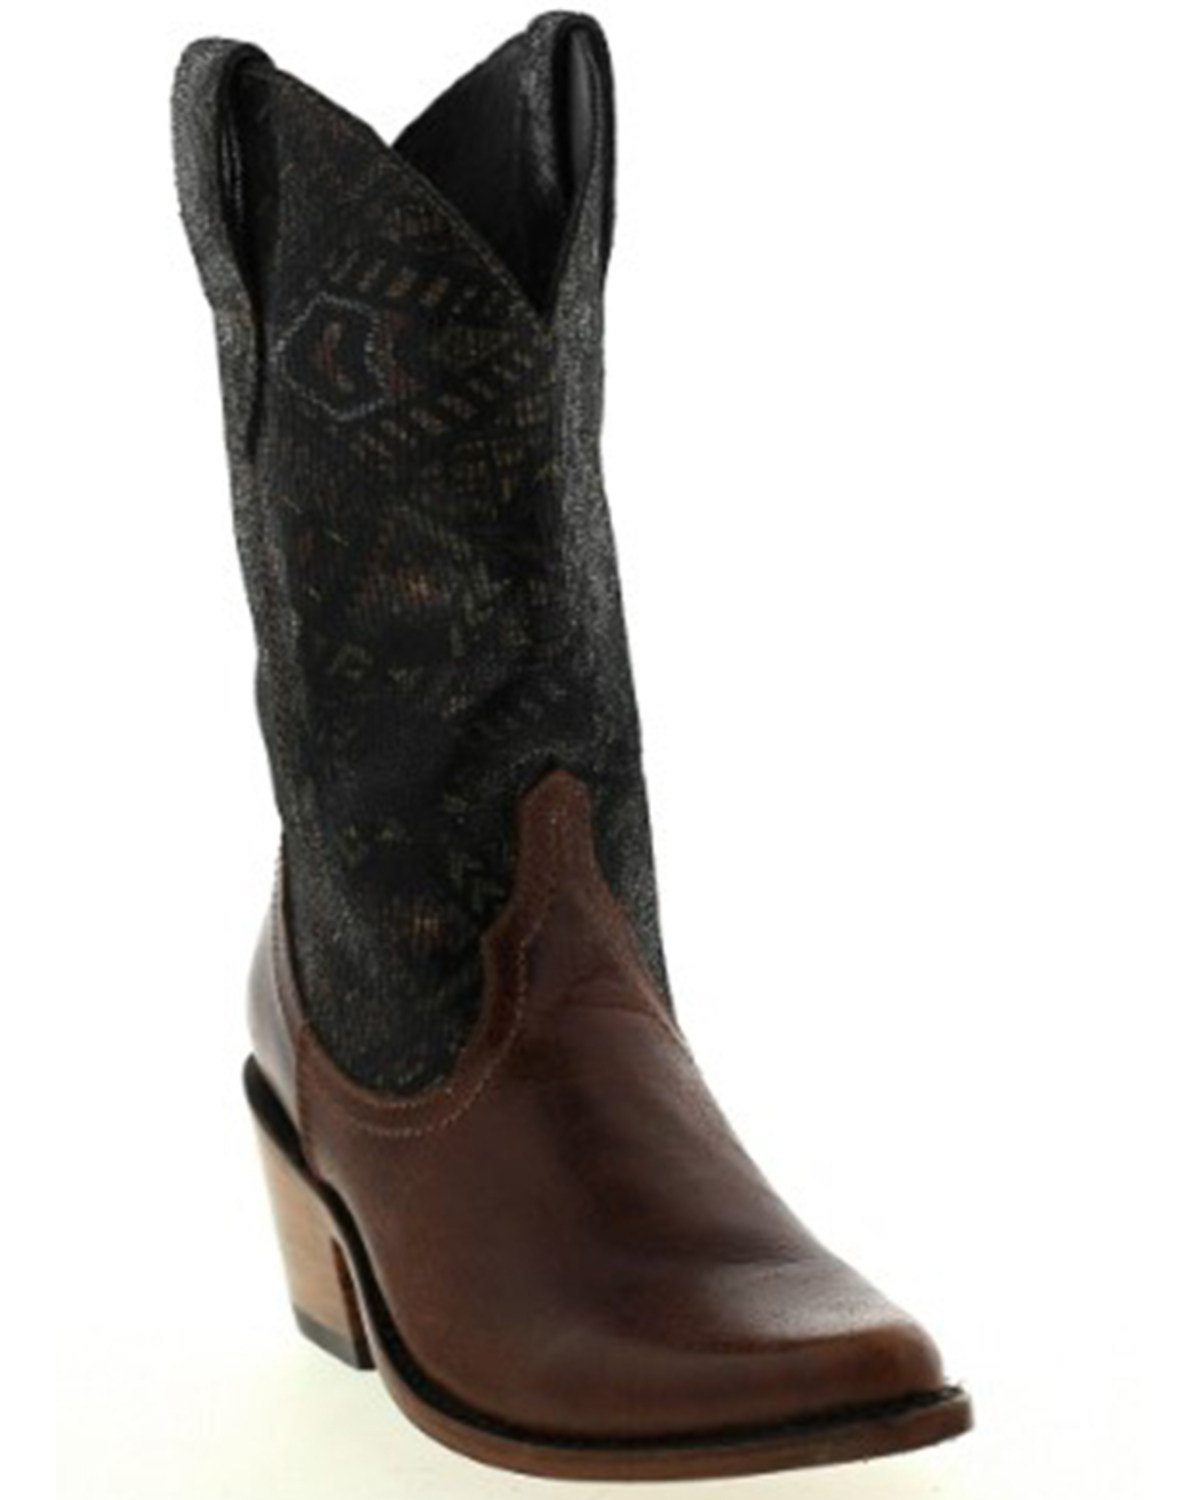 Botas Caborca For Liberty Black Women's Ashley Southwestern Classic Mid Western Boots - Snip Toe